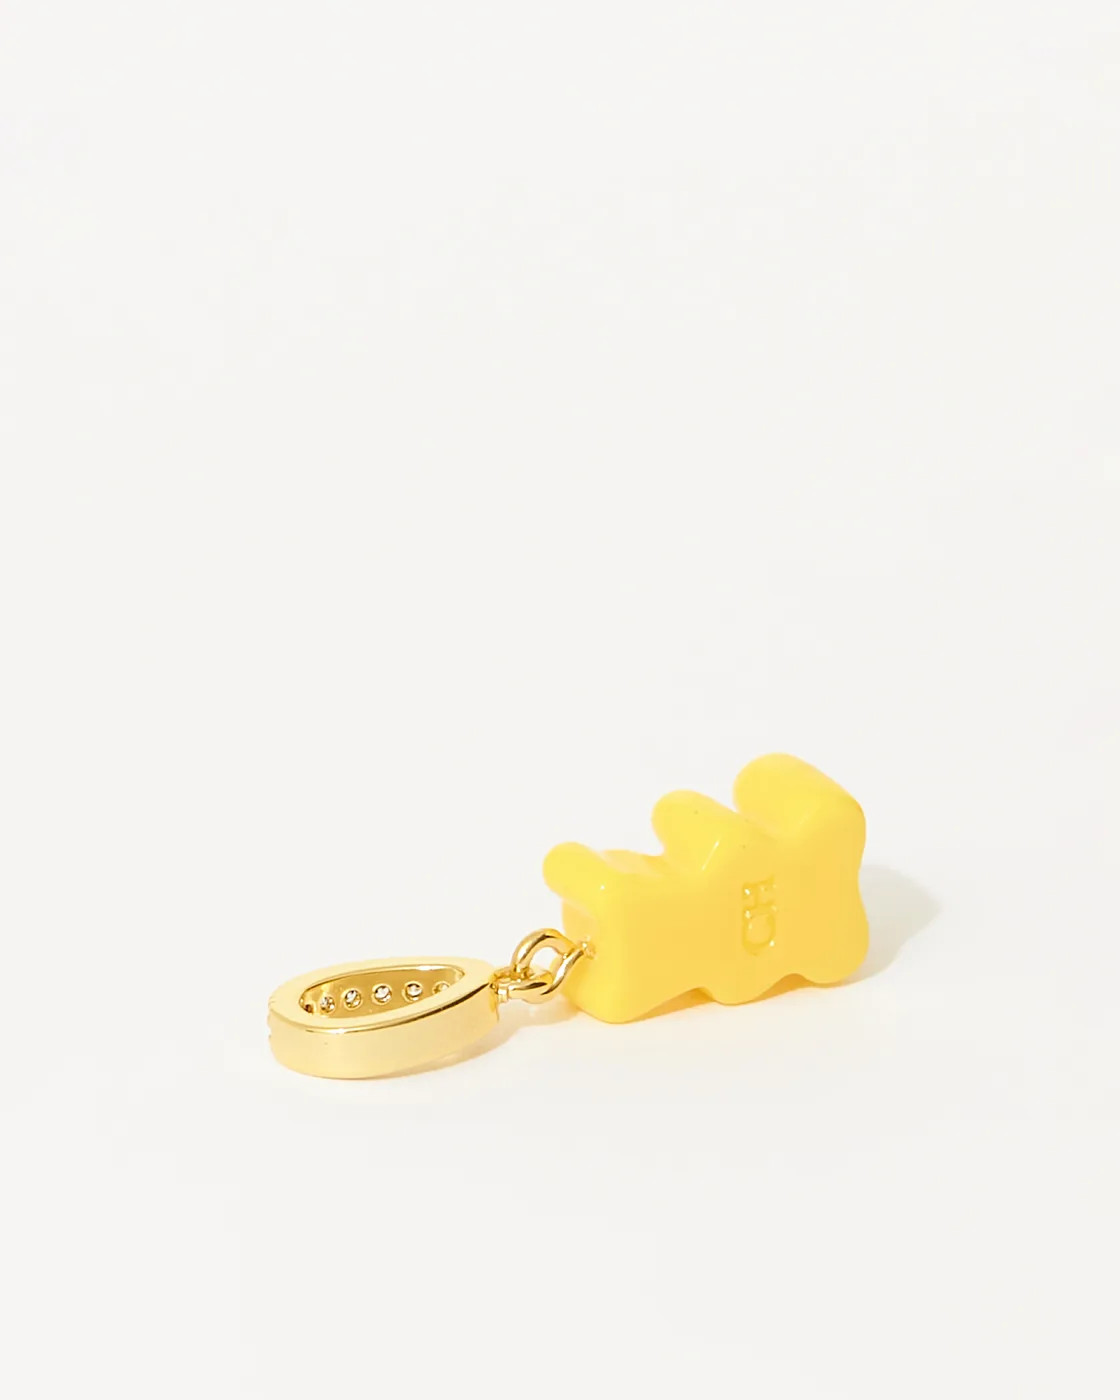 Nostalgia Bear Gold-Plated Resin Pendant with Pave Connector - NYC Taxi yellow